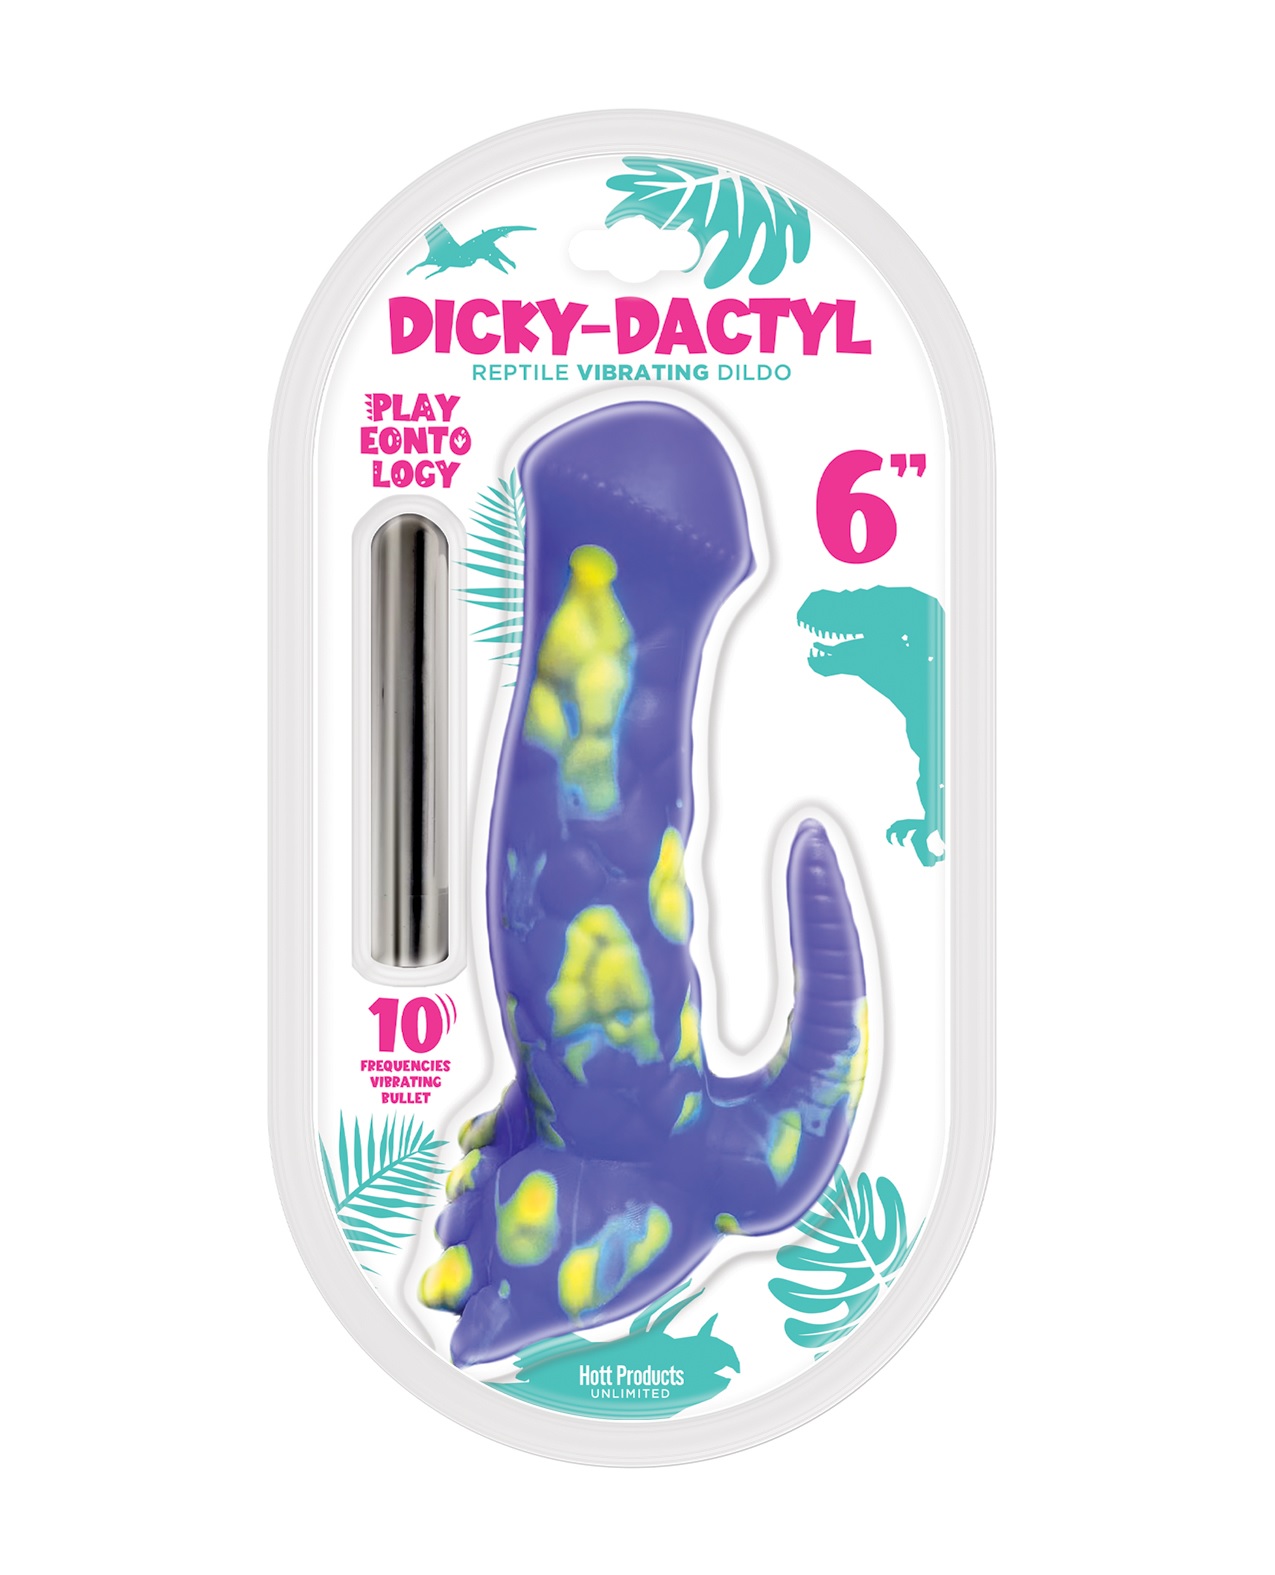 PLAYEONTOLOGY SERIES 6 IN DICKYDACTYL VIBRATING DILDO - Click Image to Close